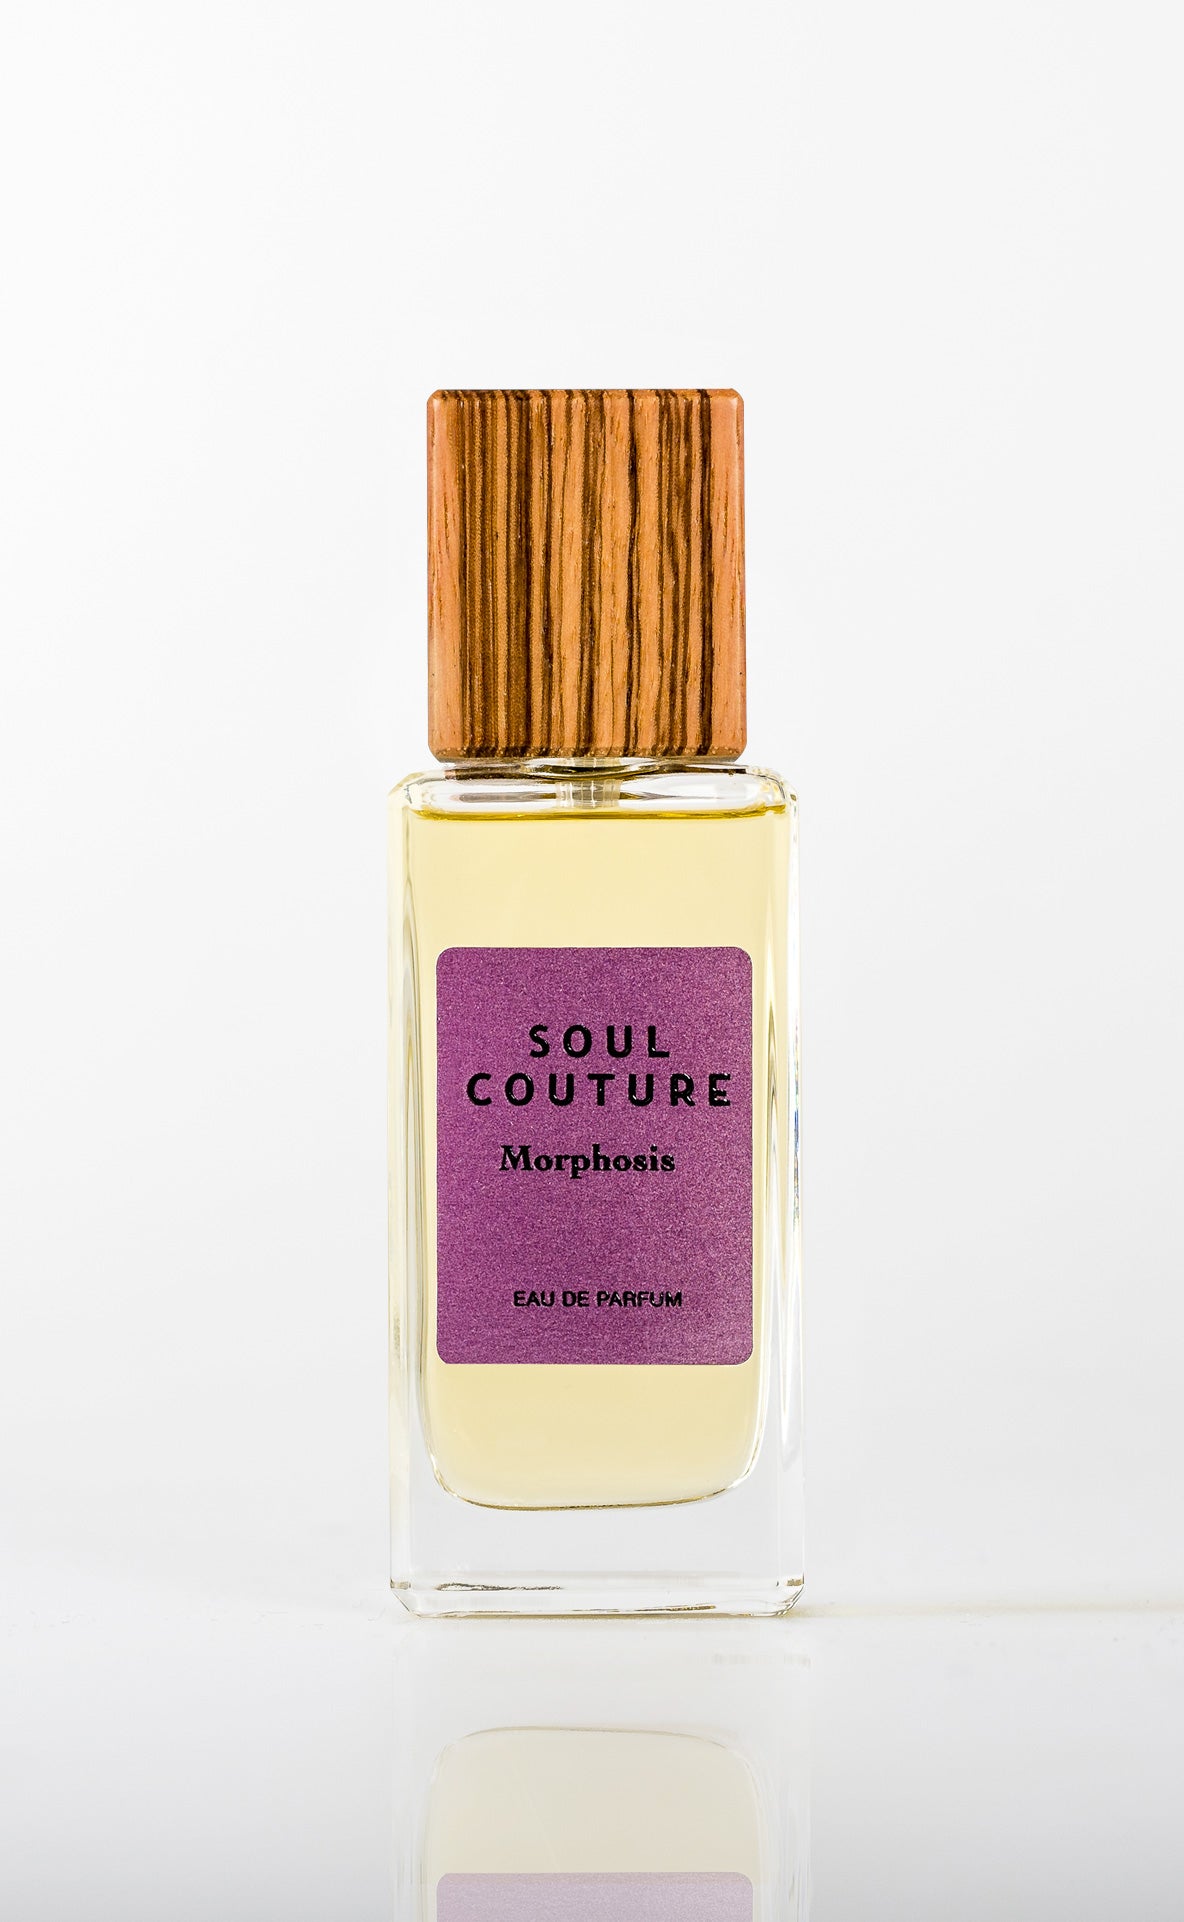 Soul Couture, EdP Morphosis